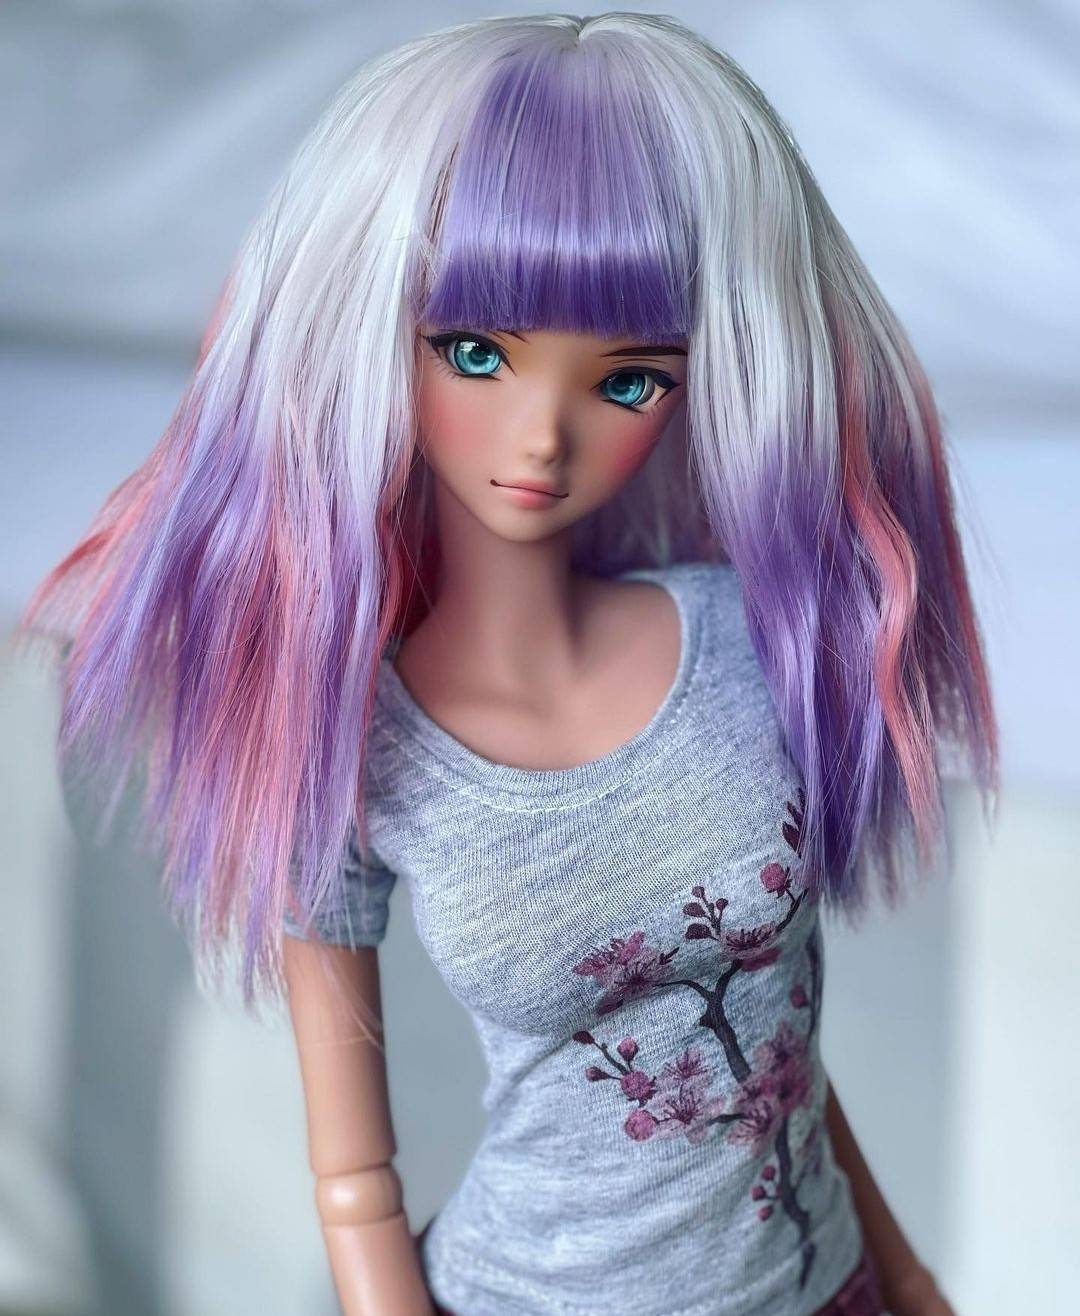 Custom doll WIG for Smart Dolls- Heat Safe - Tangle Resistant- 8.5" head size of Bjd, SD, Dollfie Dream dolls pink lavender dyed ombre